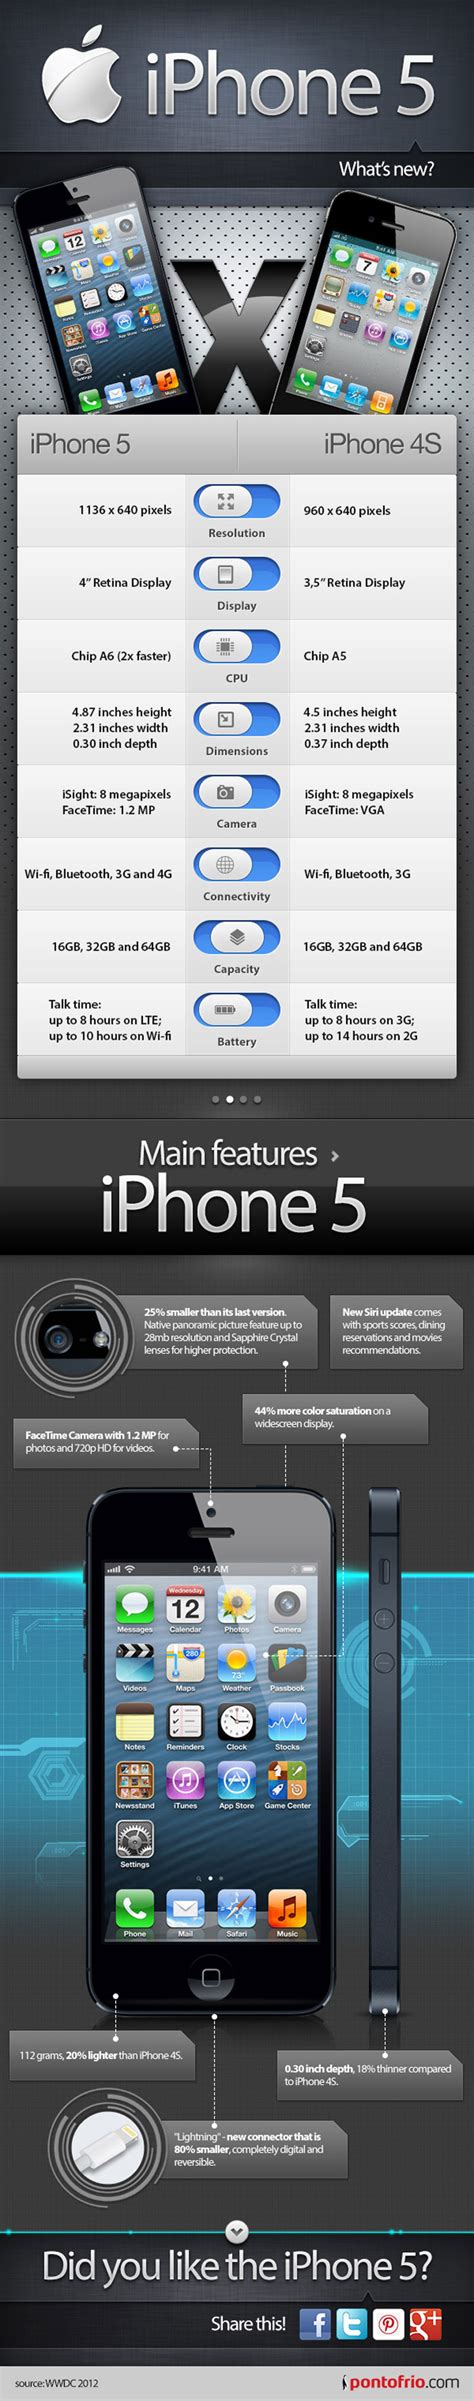 Iphone 5 Features List Infographic